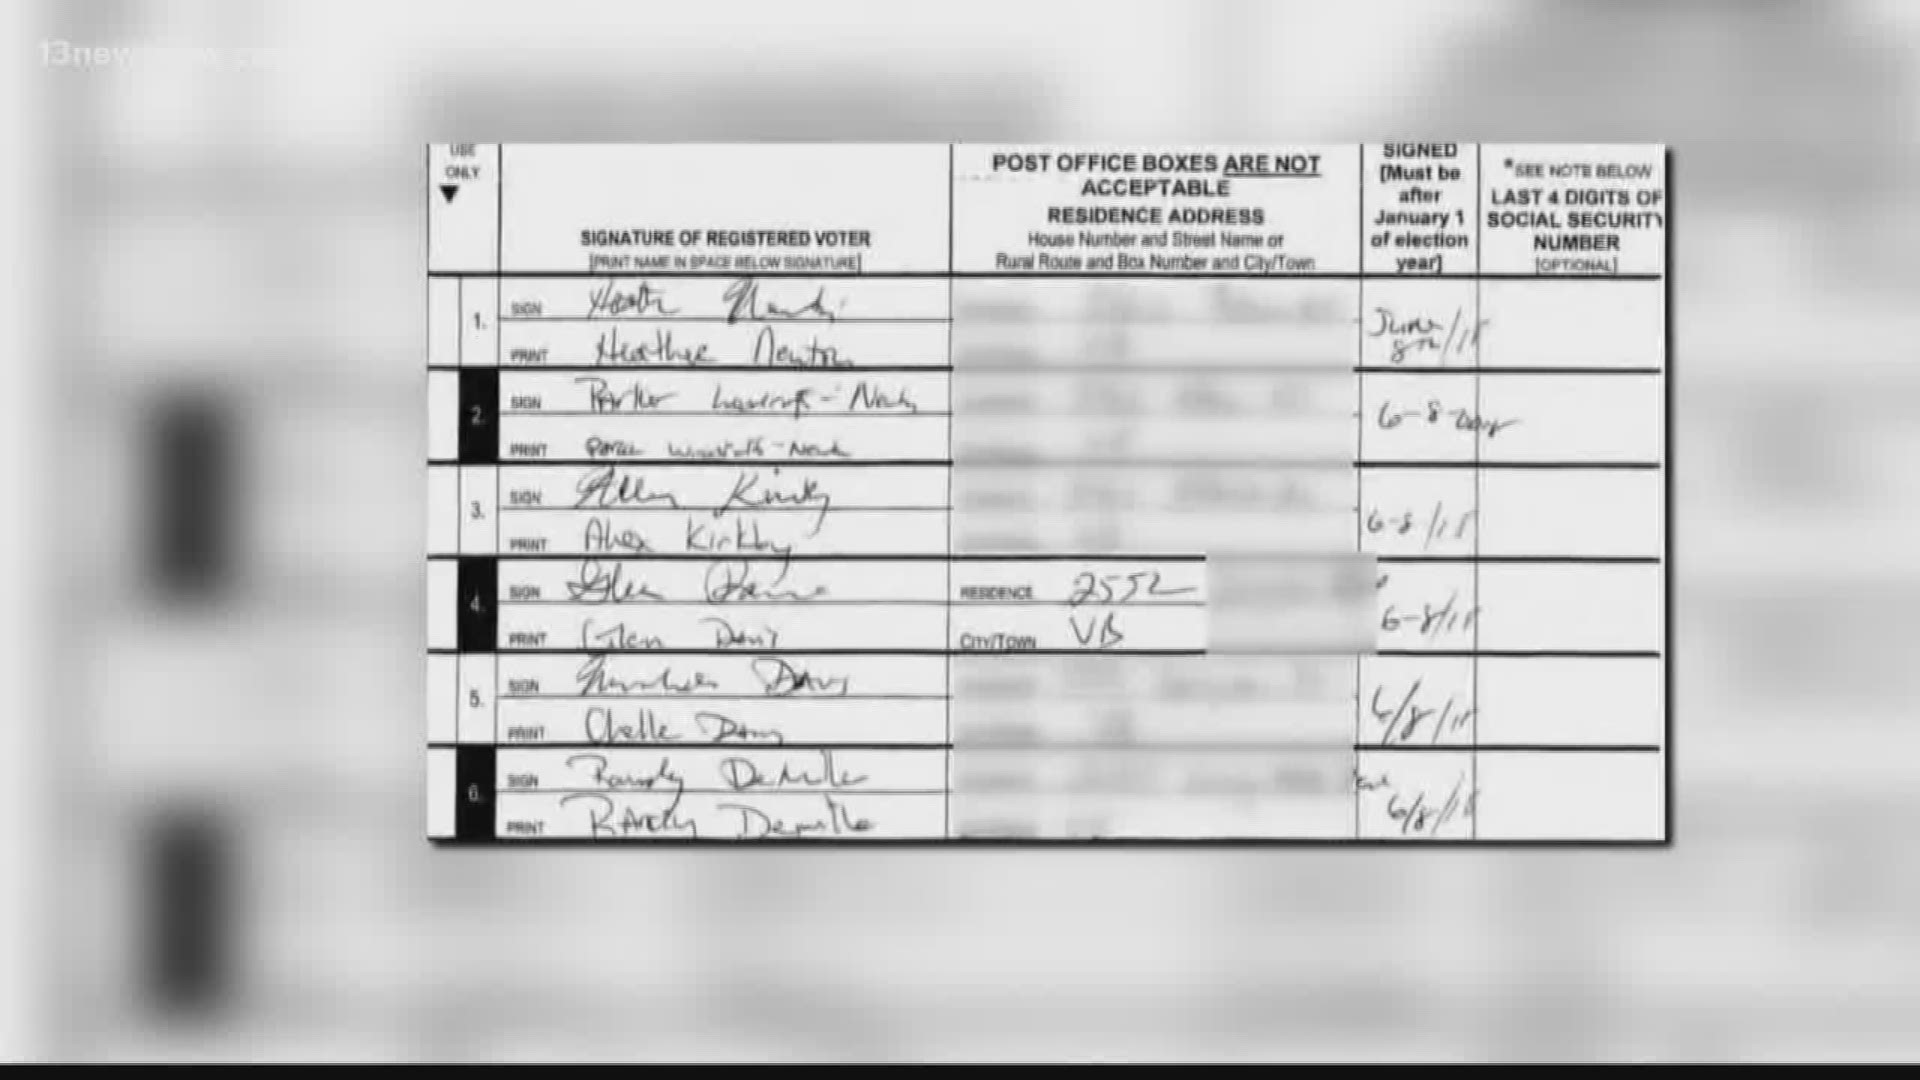 13News Now Investigative Reporter Laura Geller says that Delegate Glenn Davis says he and his wife's names were forged on one of the ballot petitions for Shaun Brown.